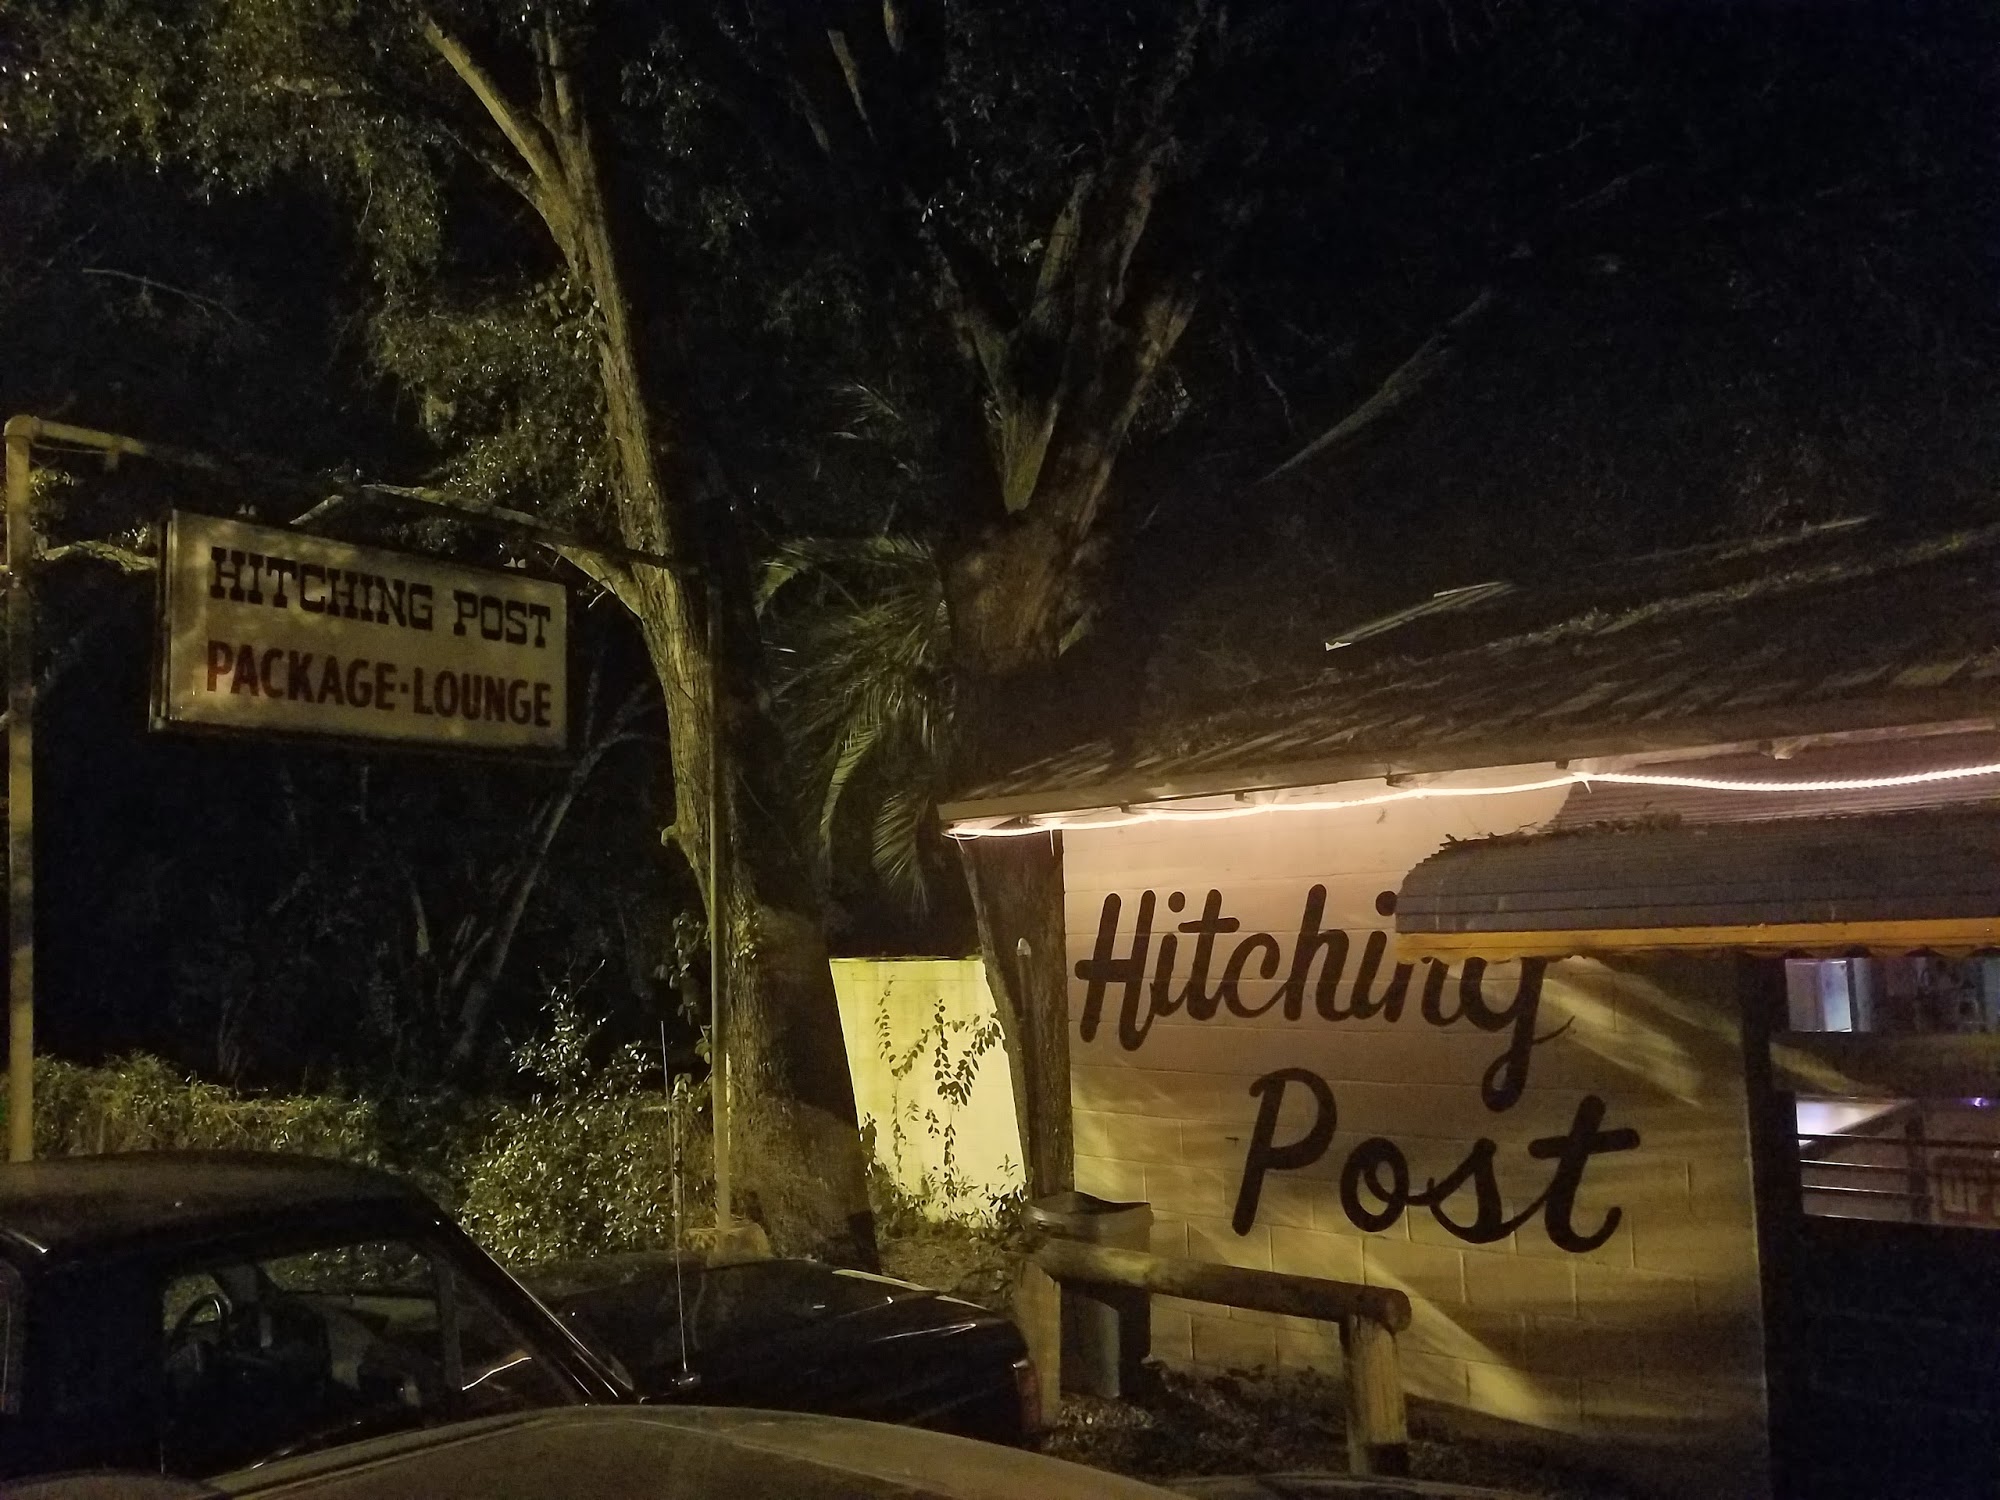 Hitching Post Package & Lounge